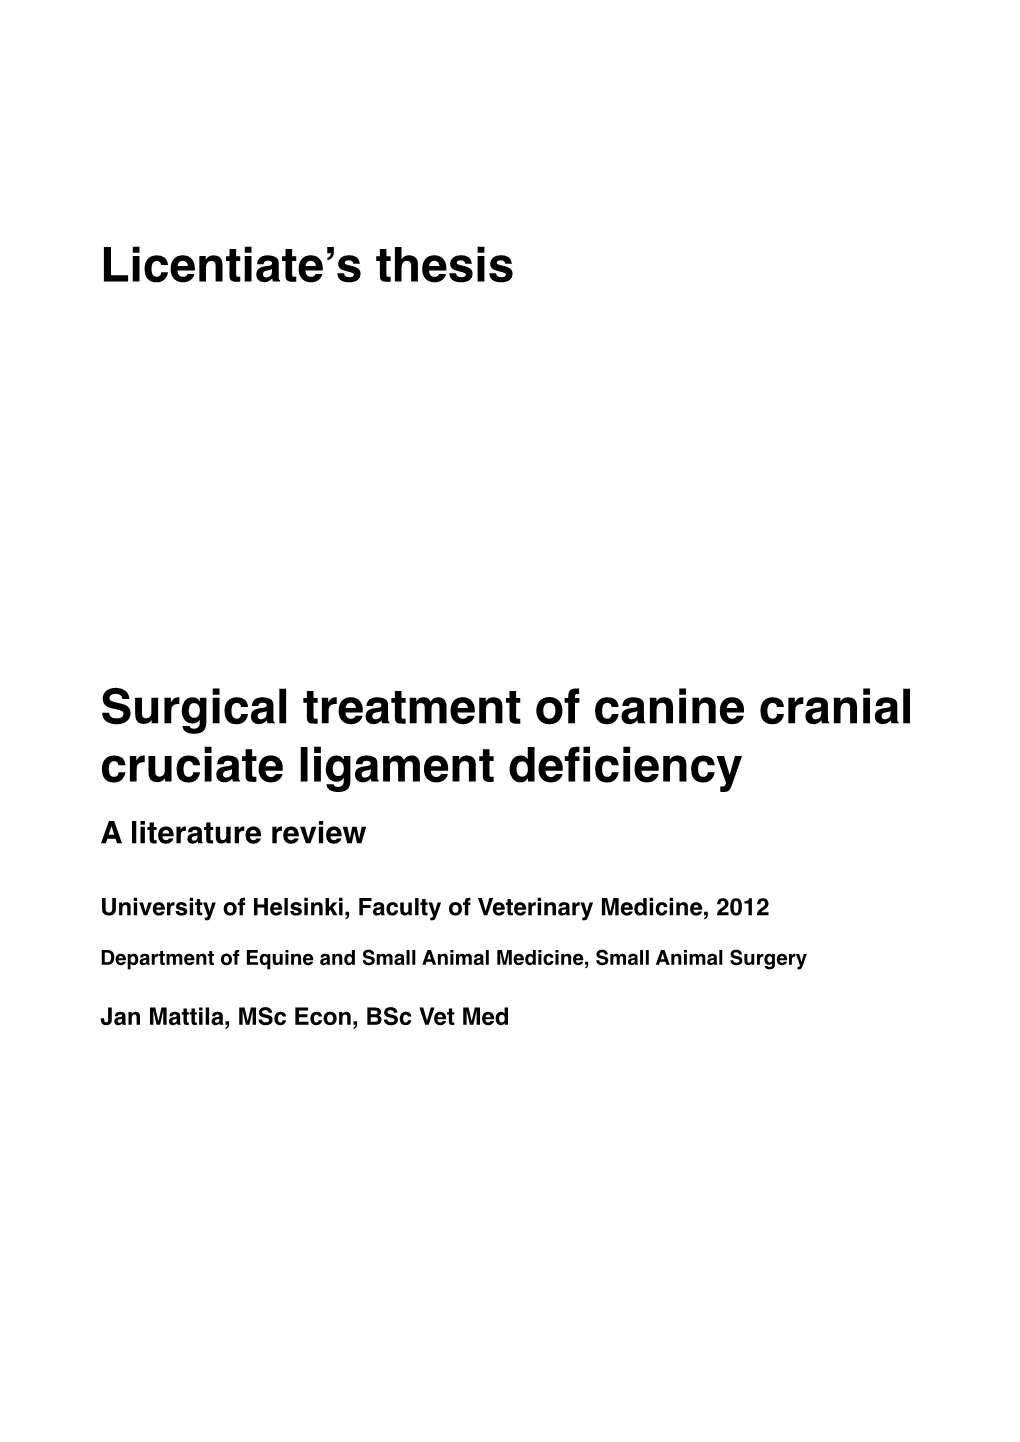 Surgical Treatment of Canine Cranial Cruciate Ligament Deficiency